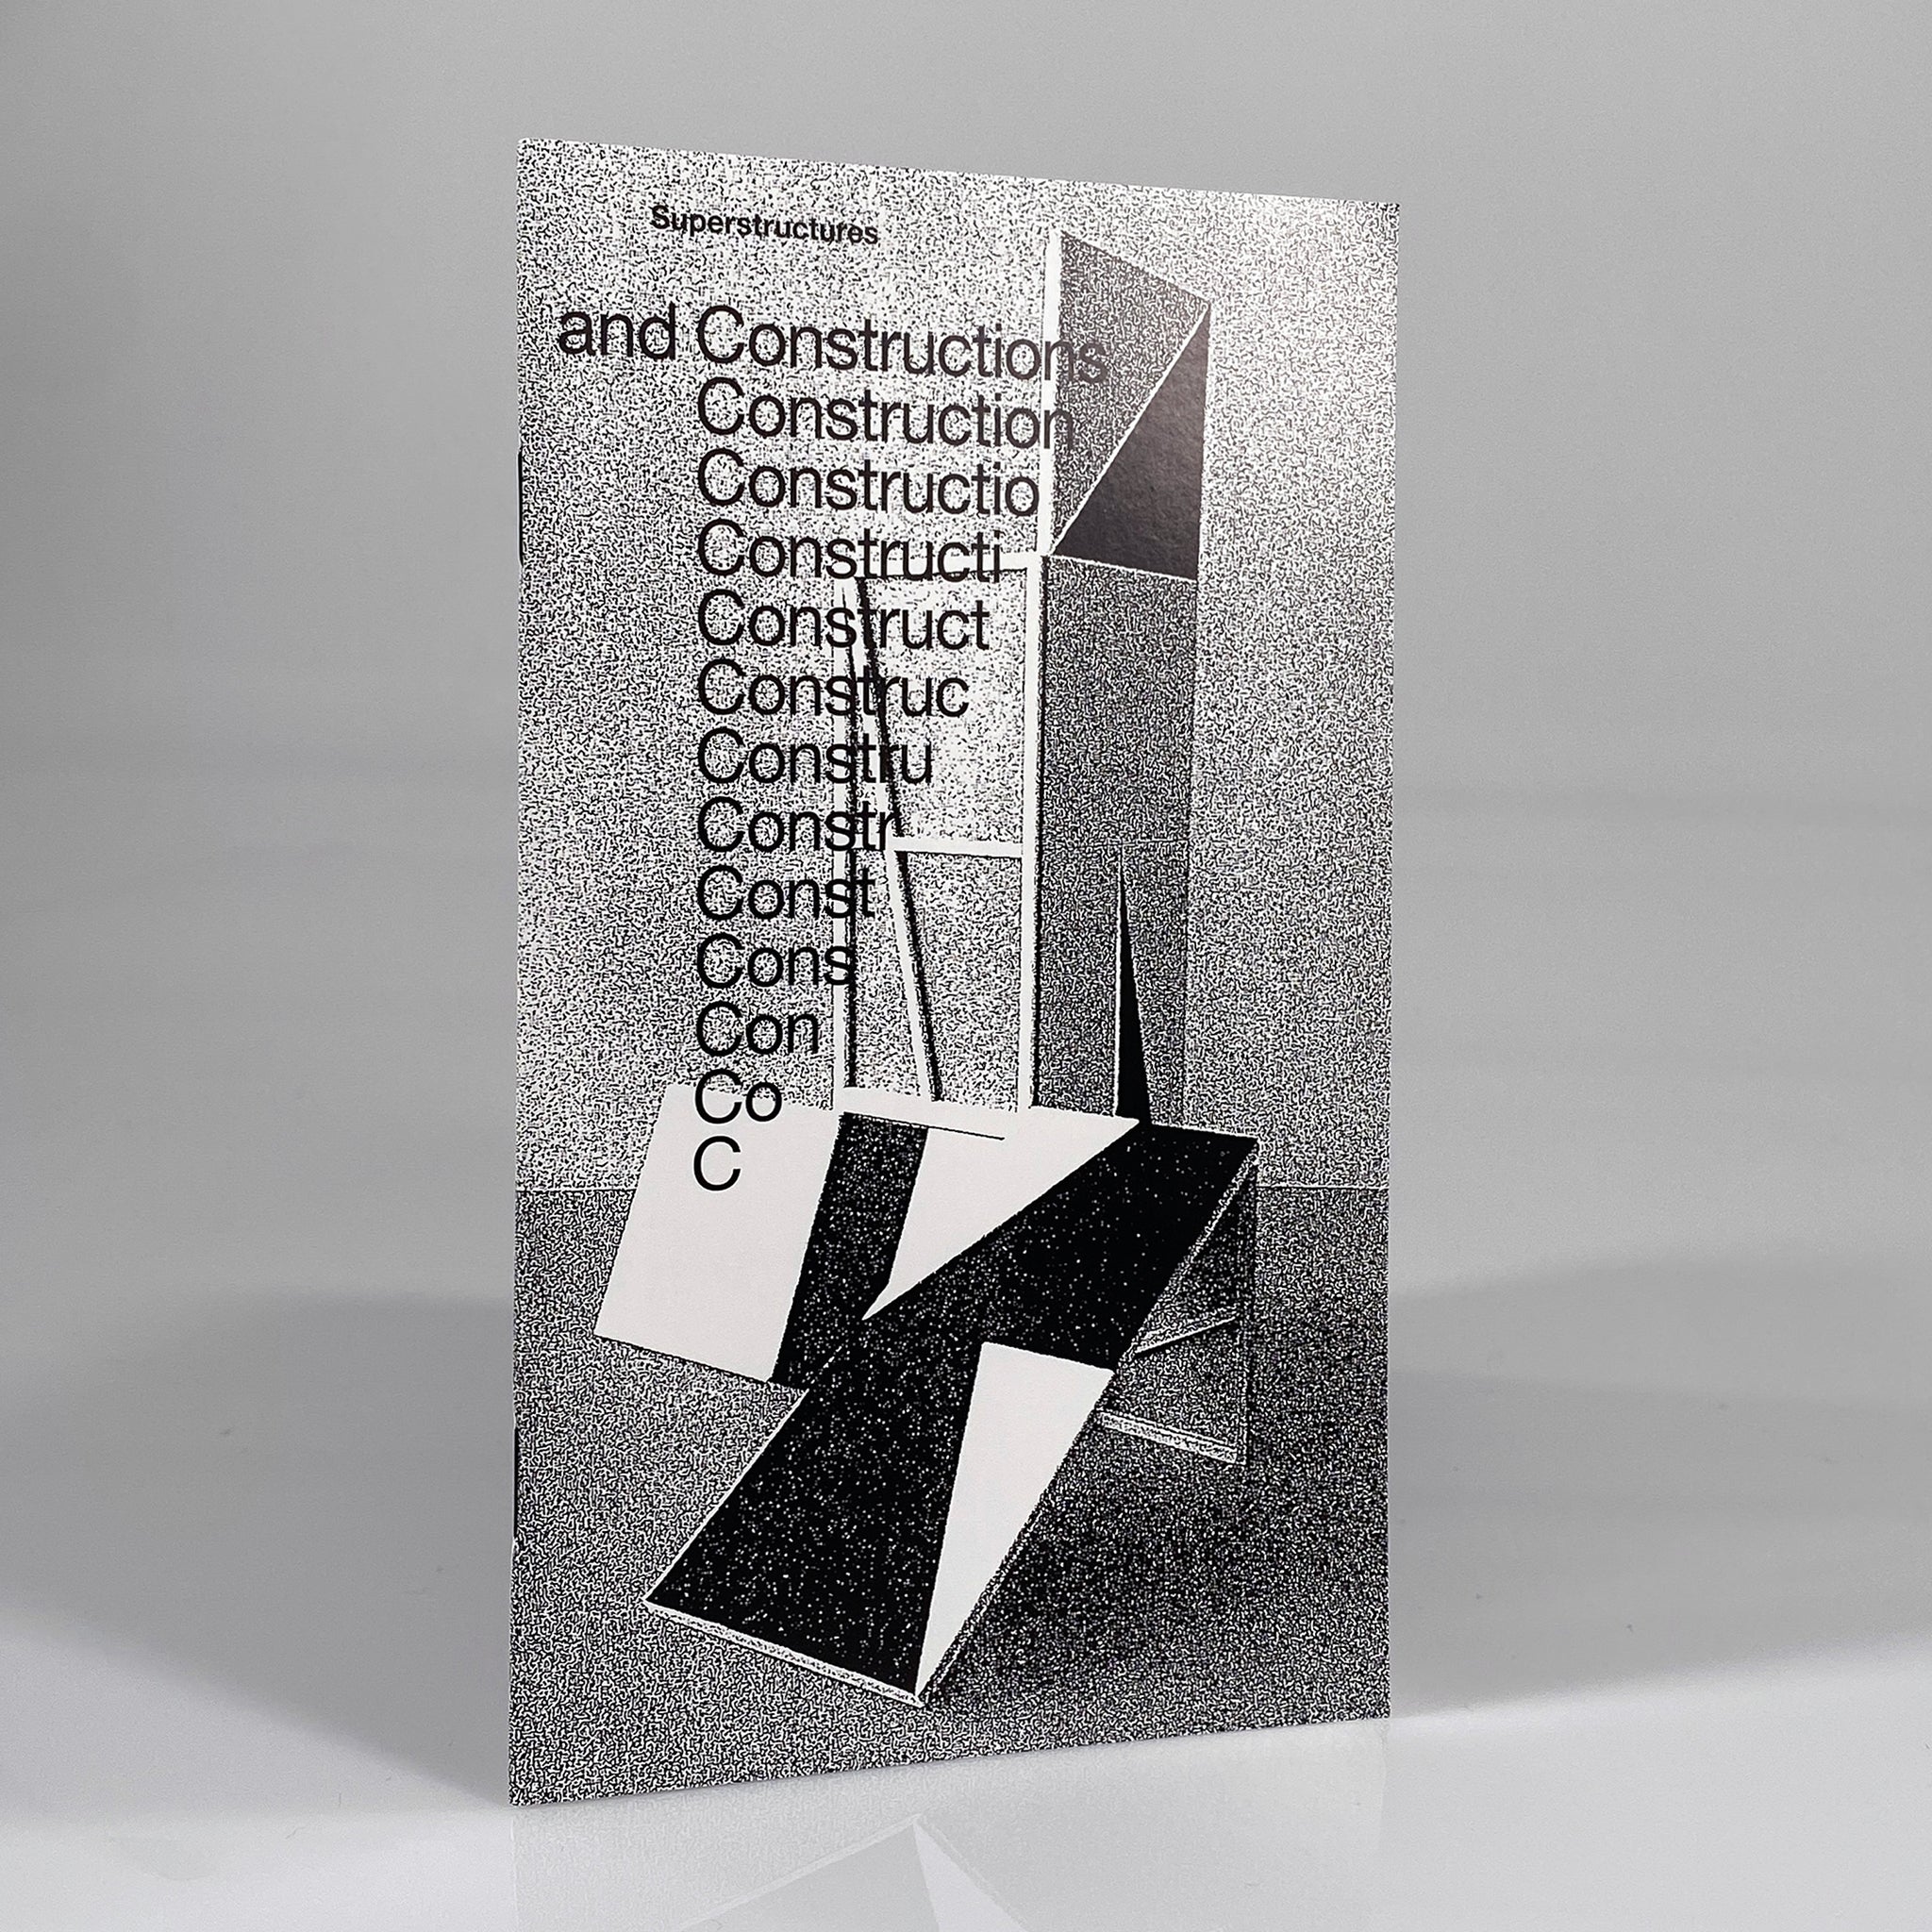 Superstructures (Notes on Experimental Jetset / Volume 2)